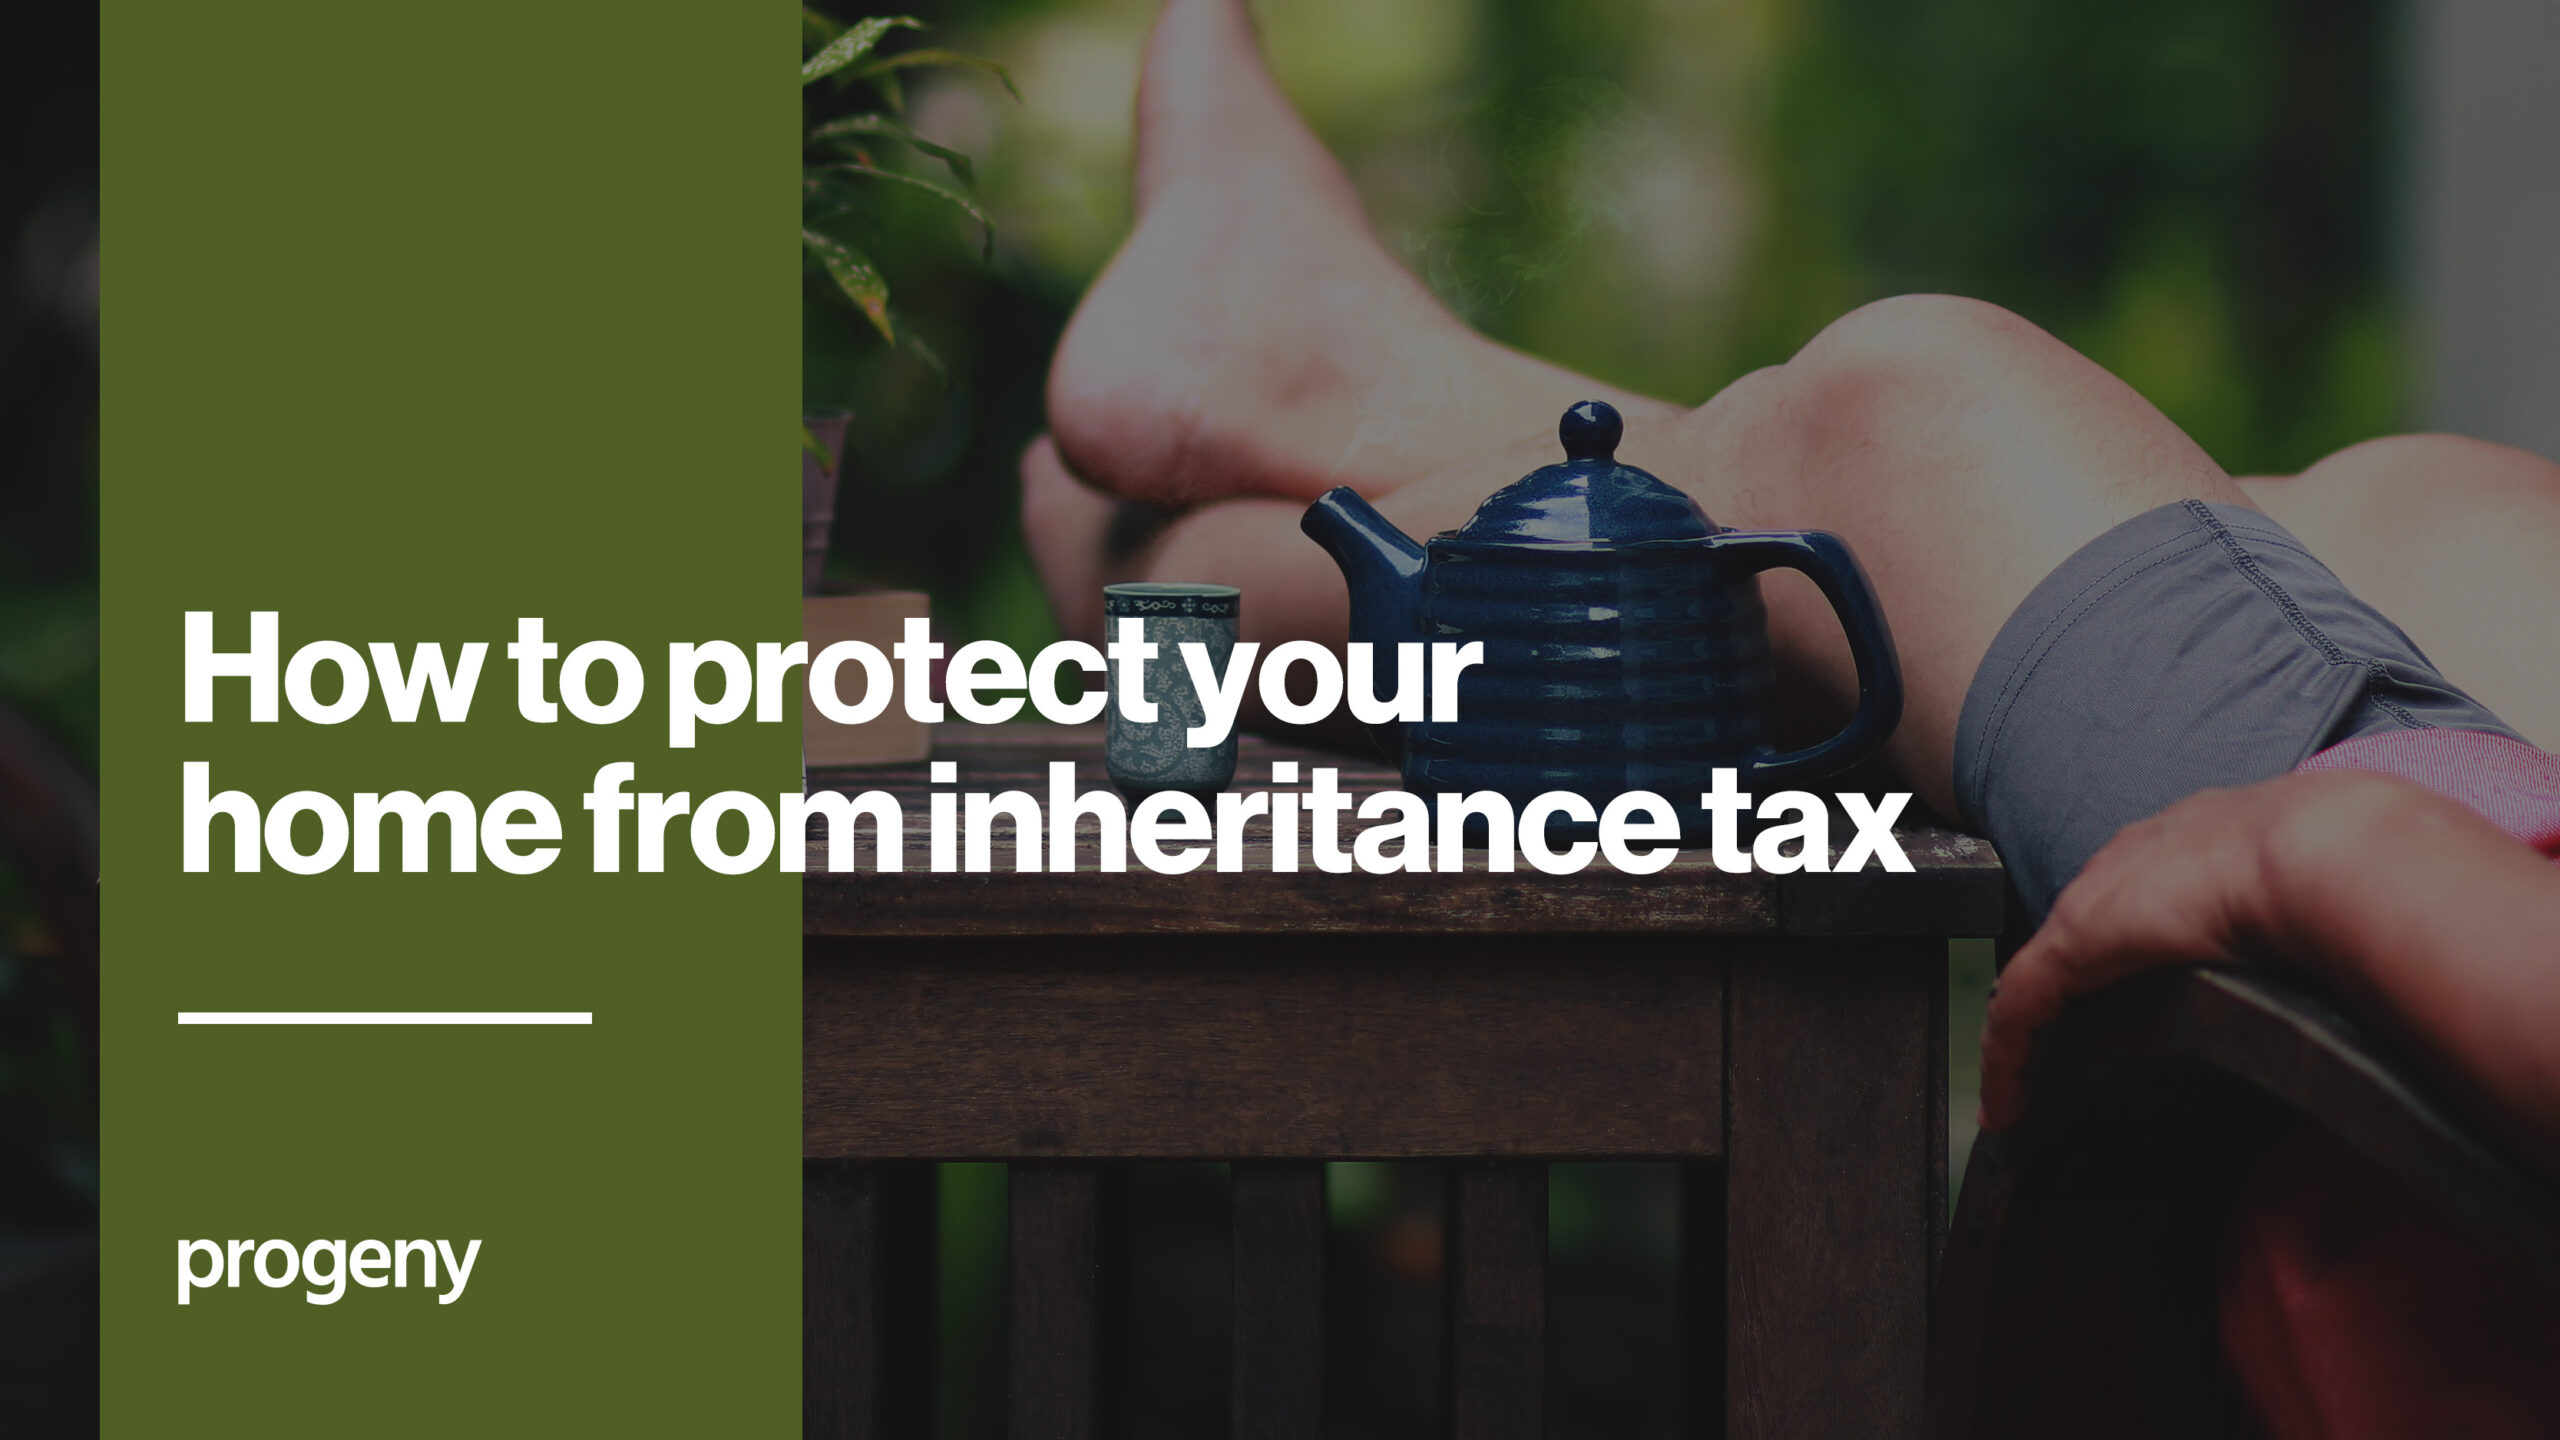 Inheritance tax on your home